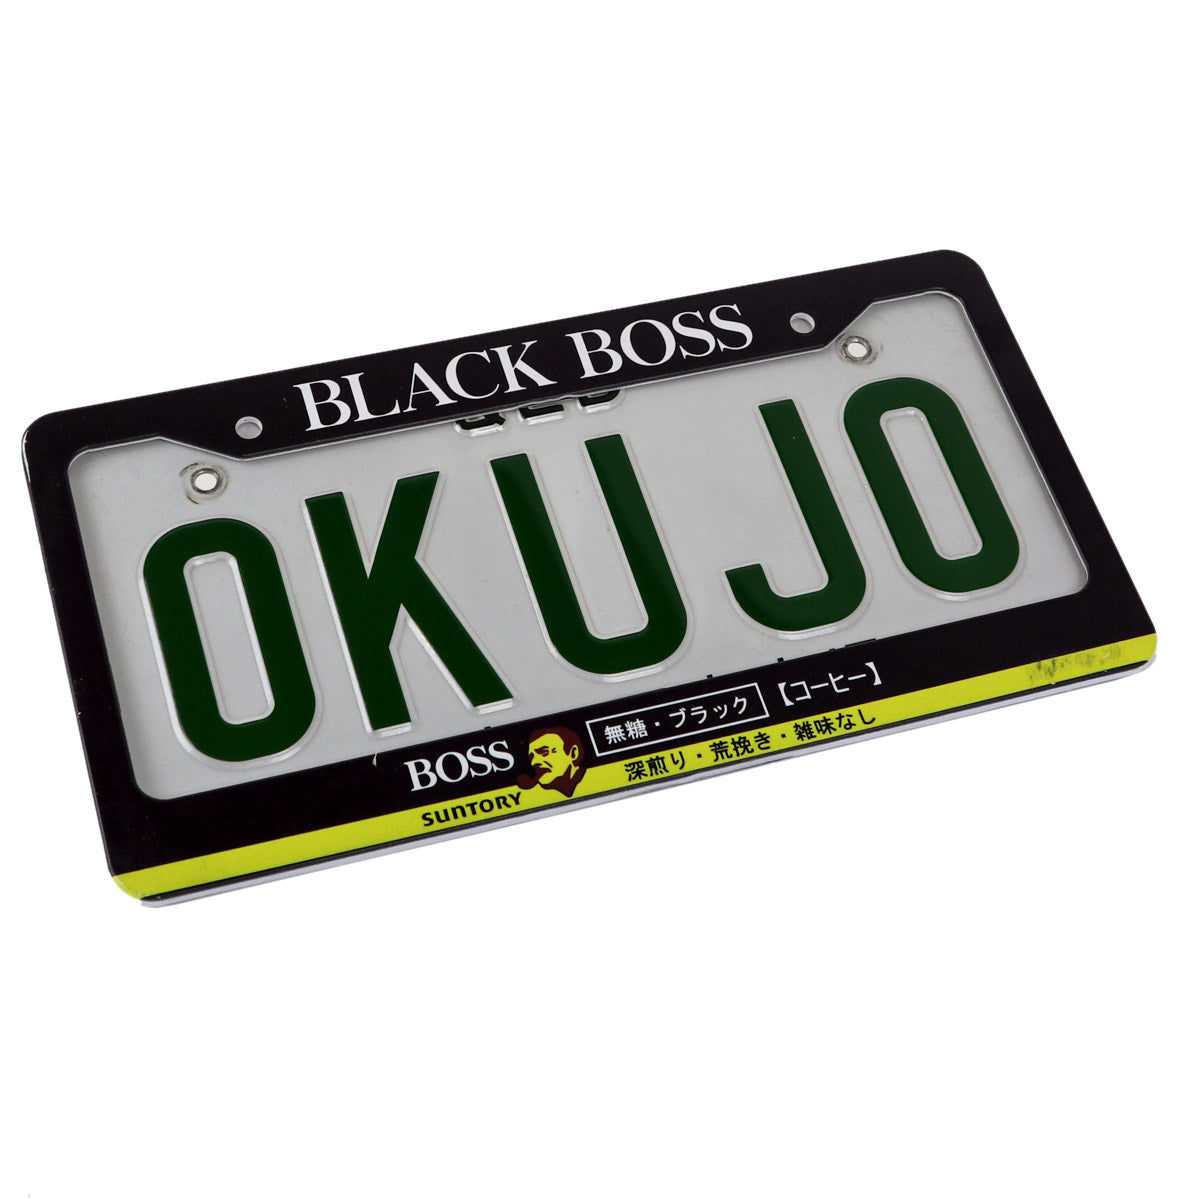 Number Plate Frames - Food and Drinks